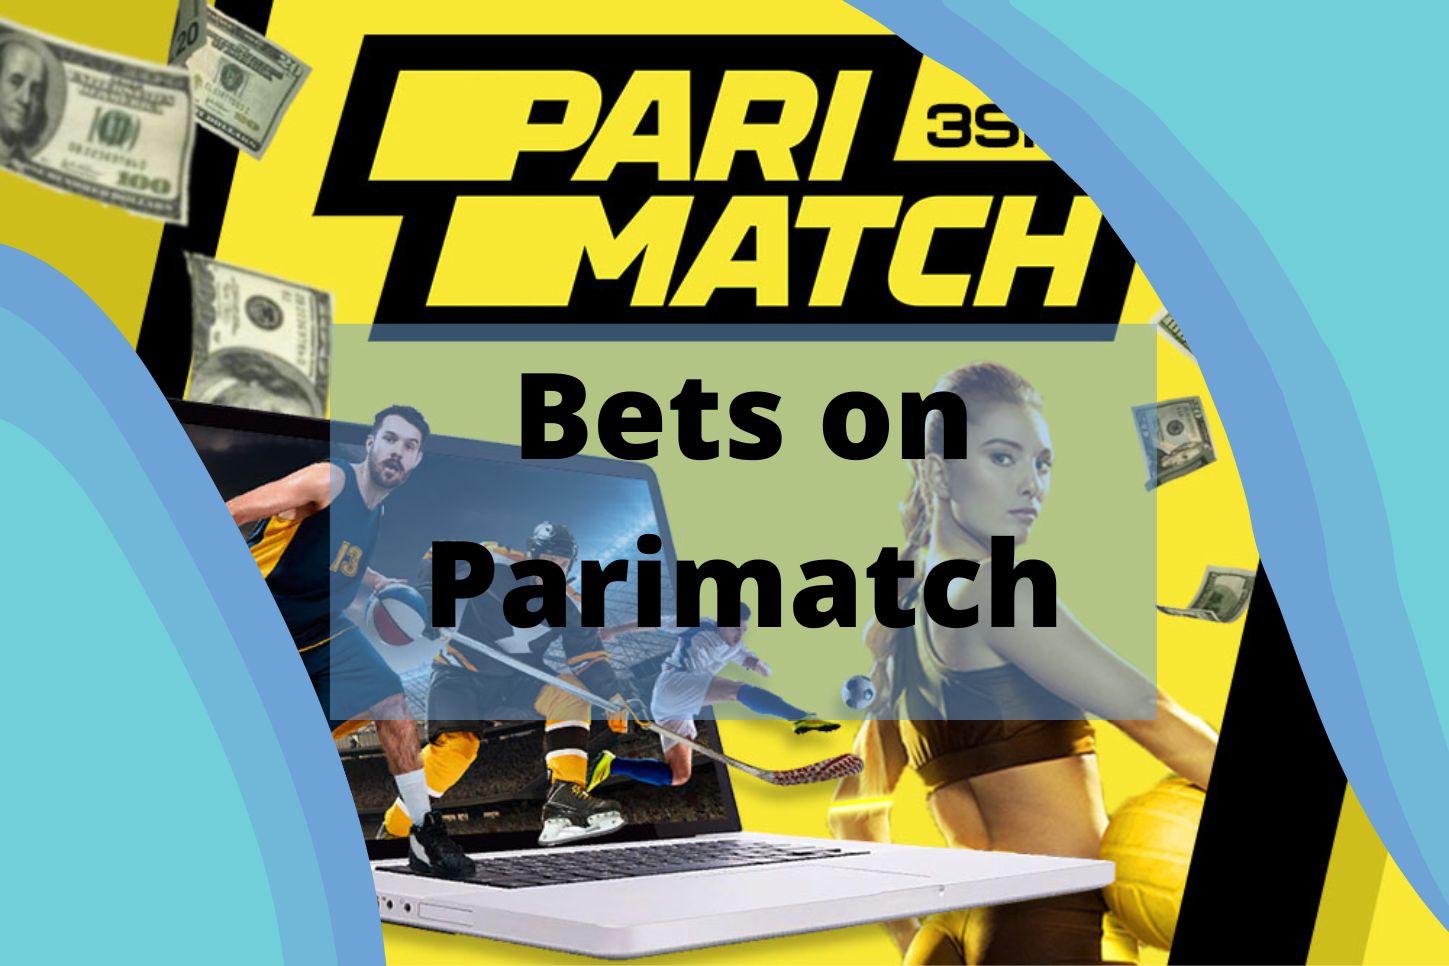 Are you ready for Parimatch India betting experience?